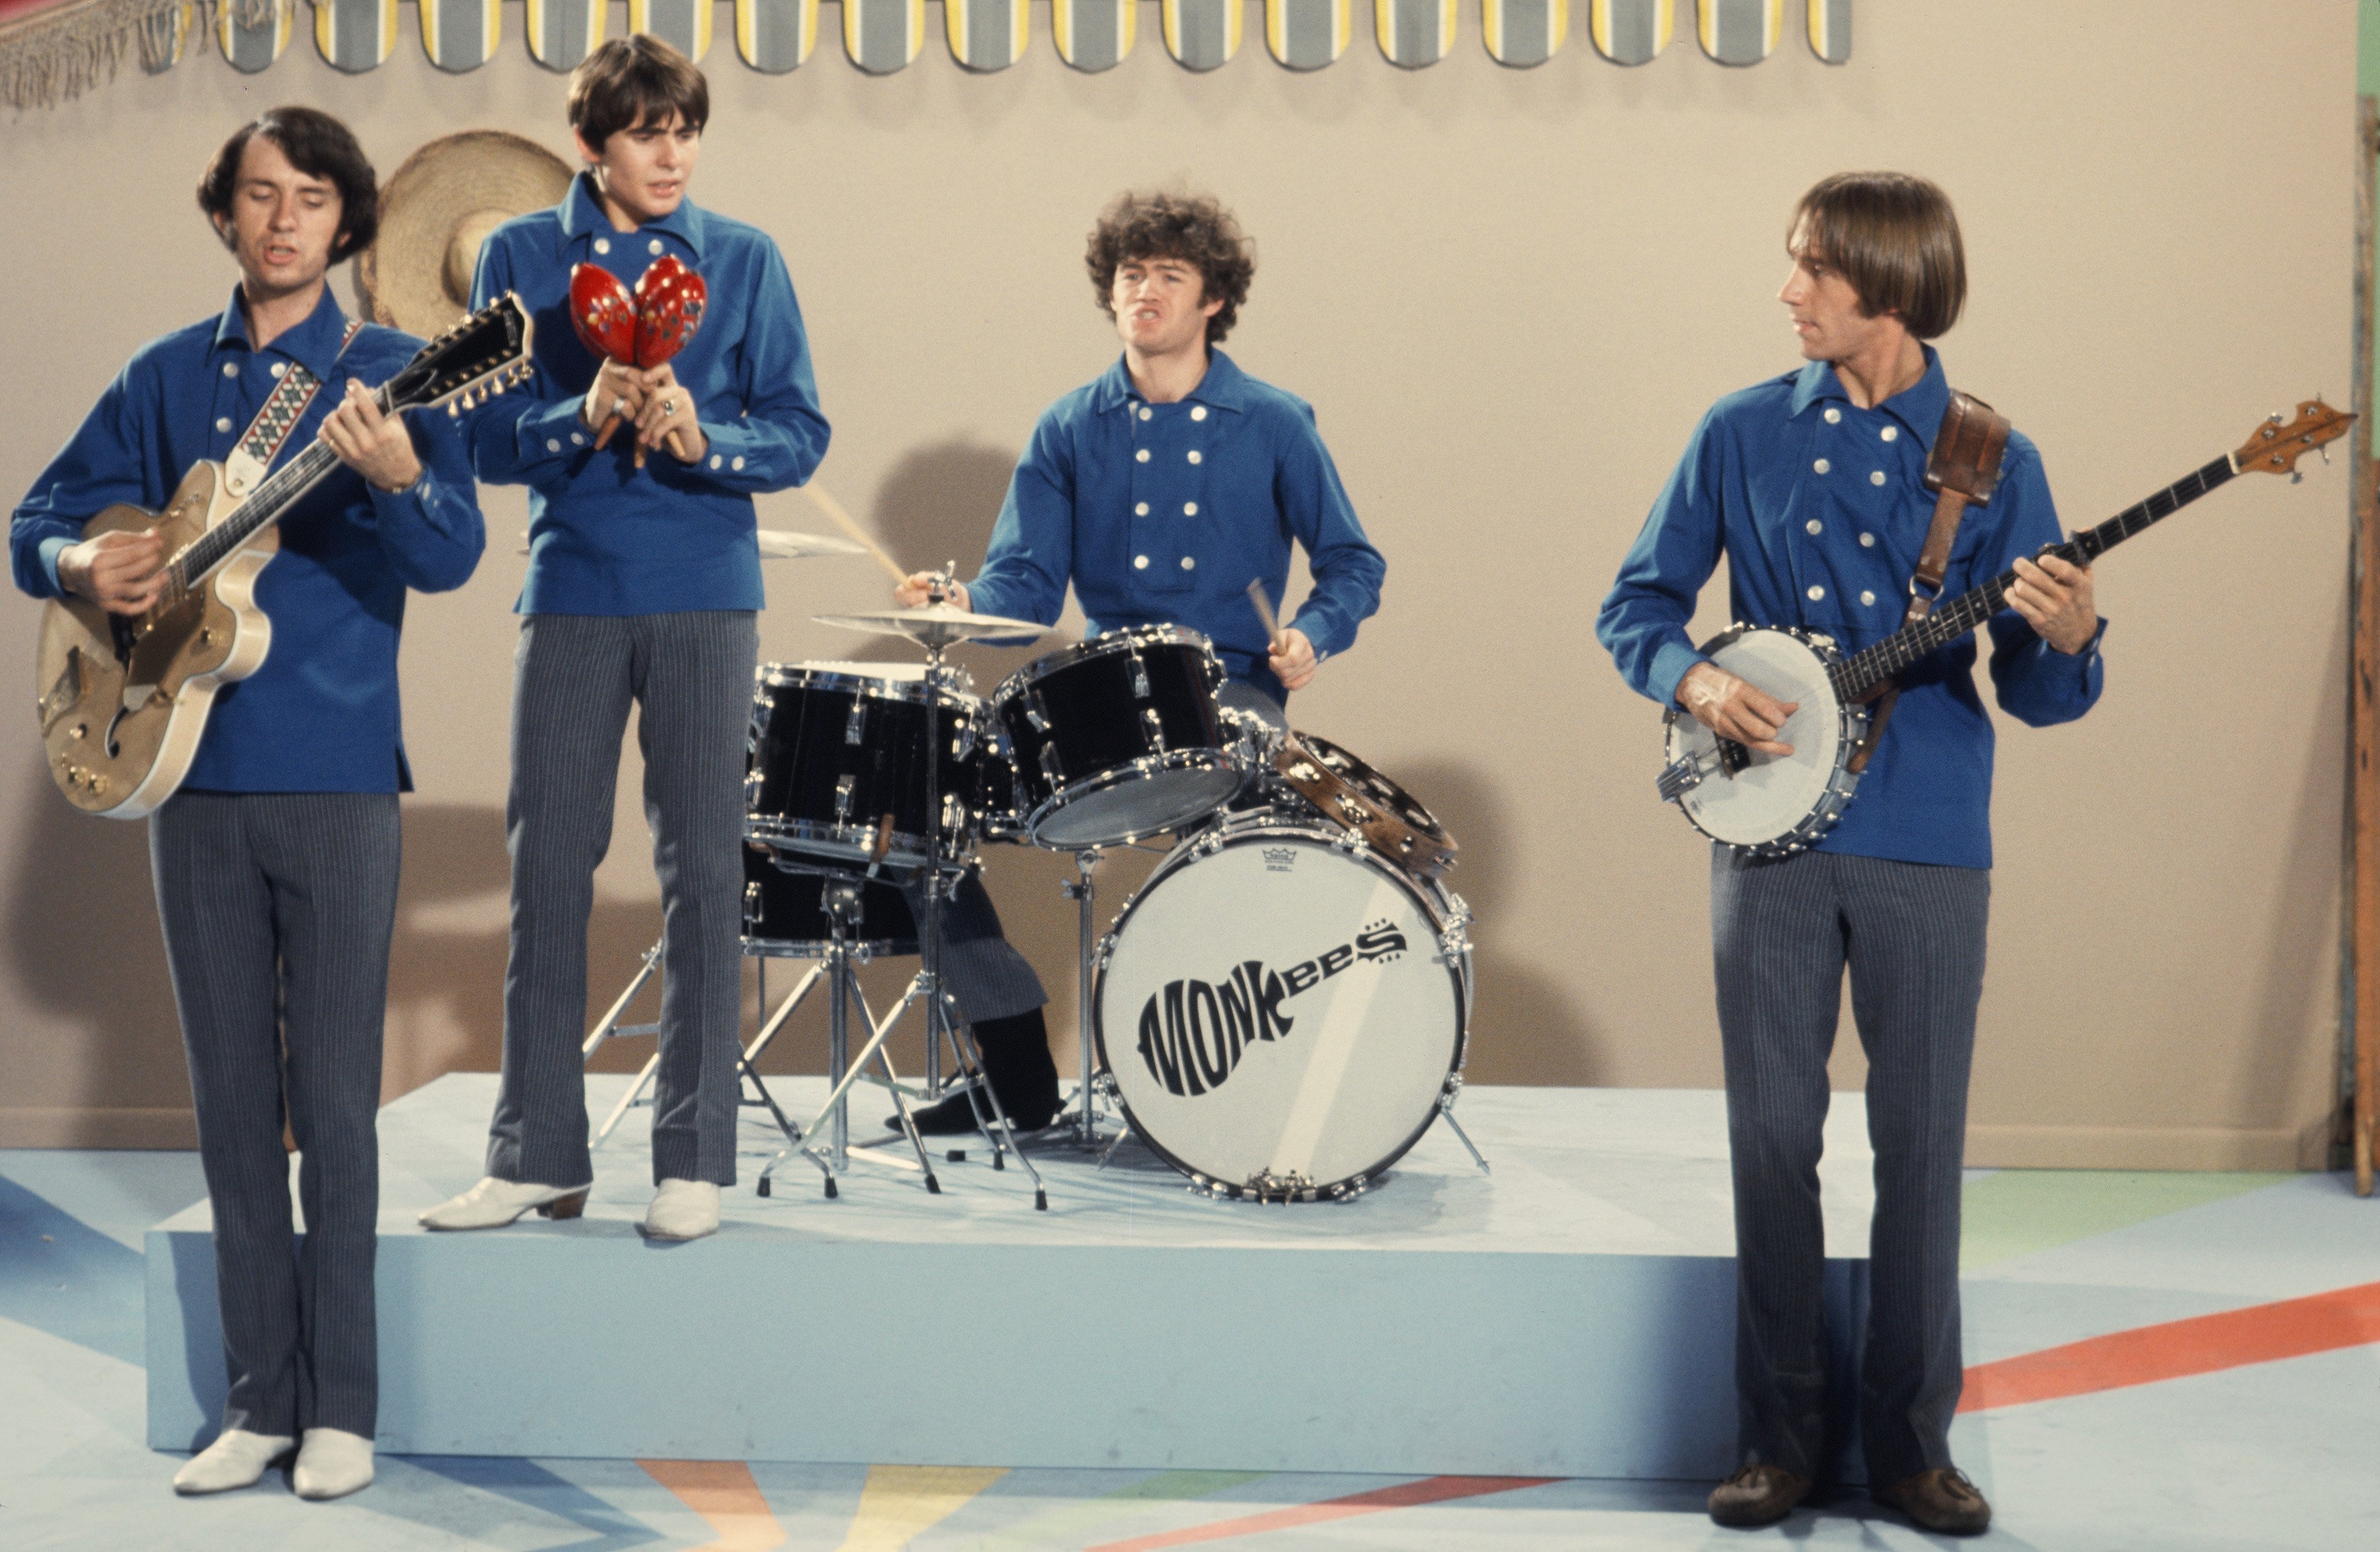 The Monkees’ Mike Nesmith, Davy Jones, Micky Dolenz, and Peter Tork wearing blue during the "I'm a Believer" era